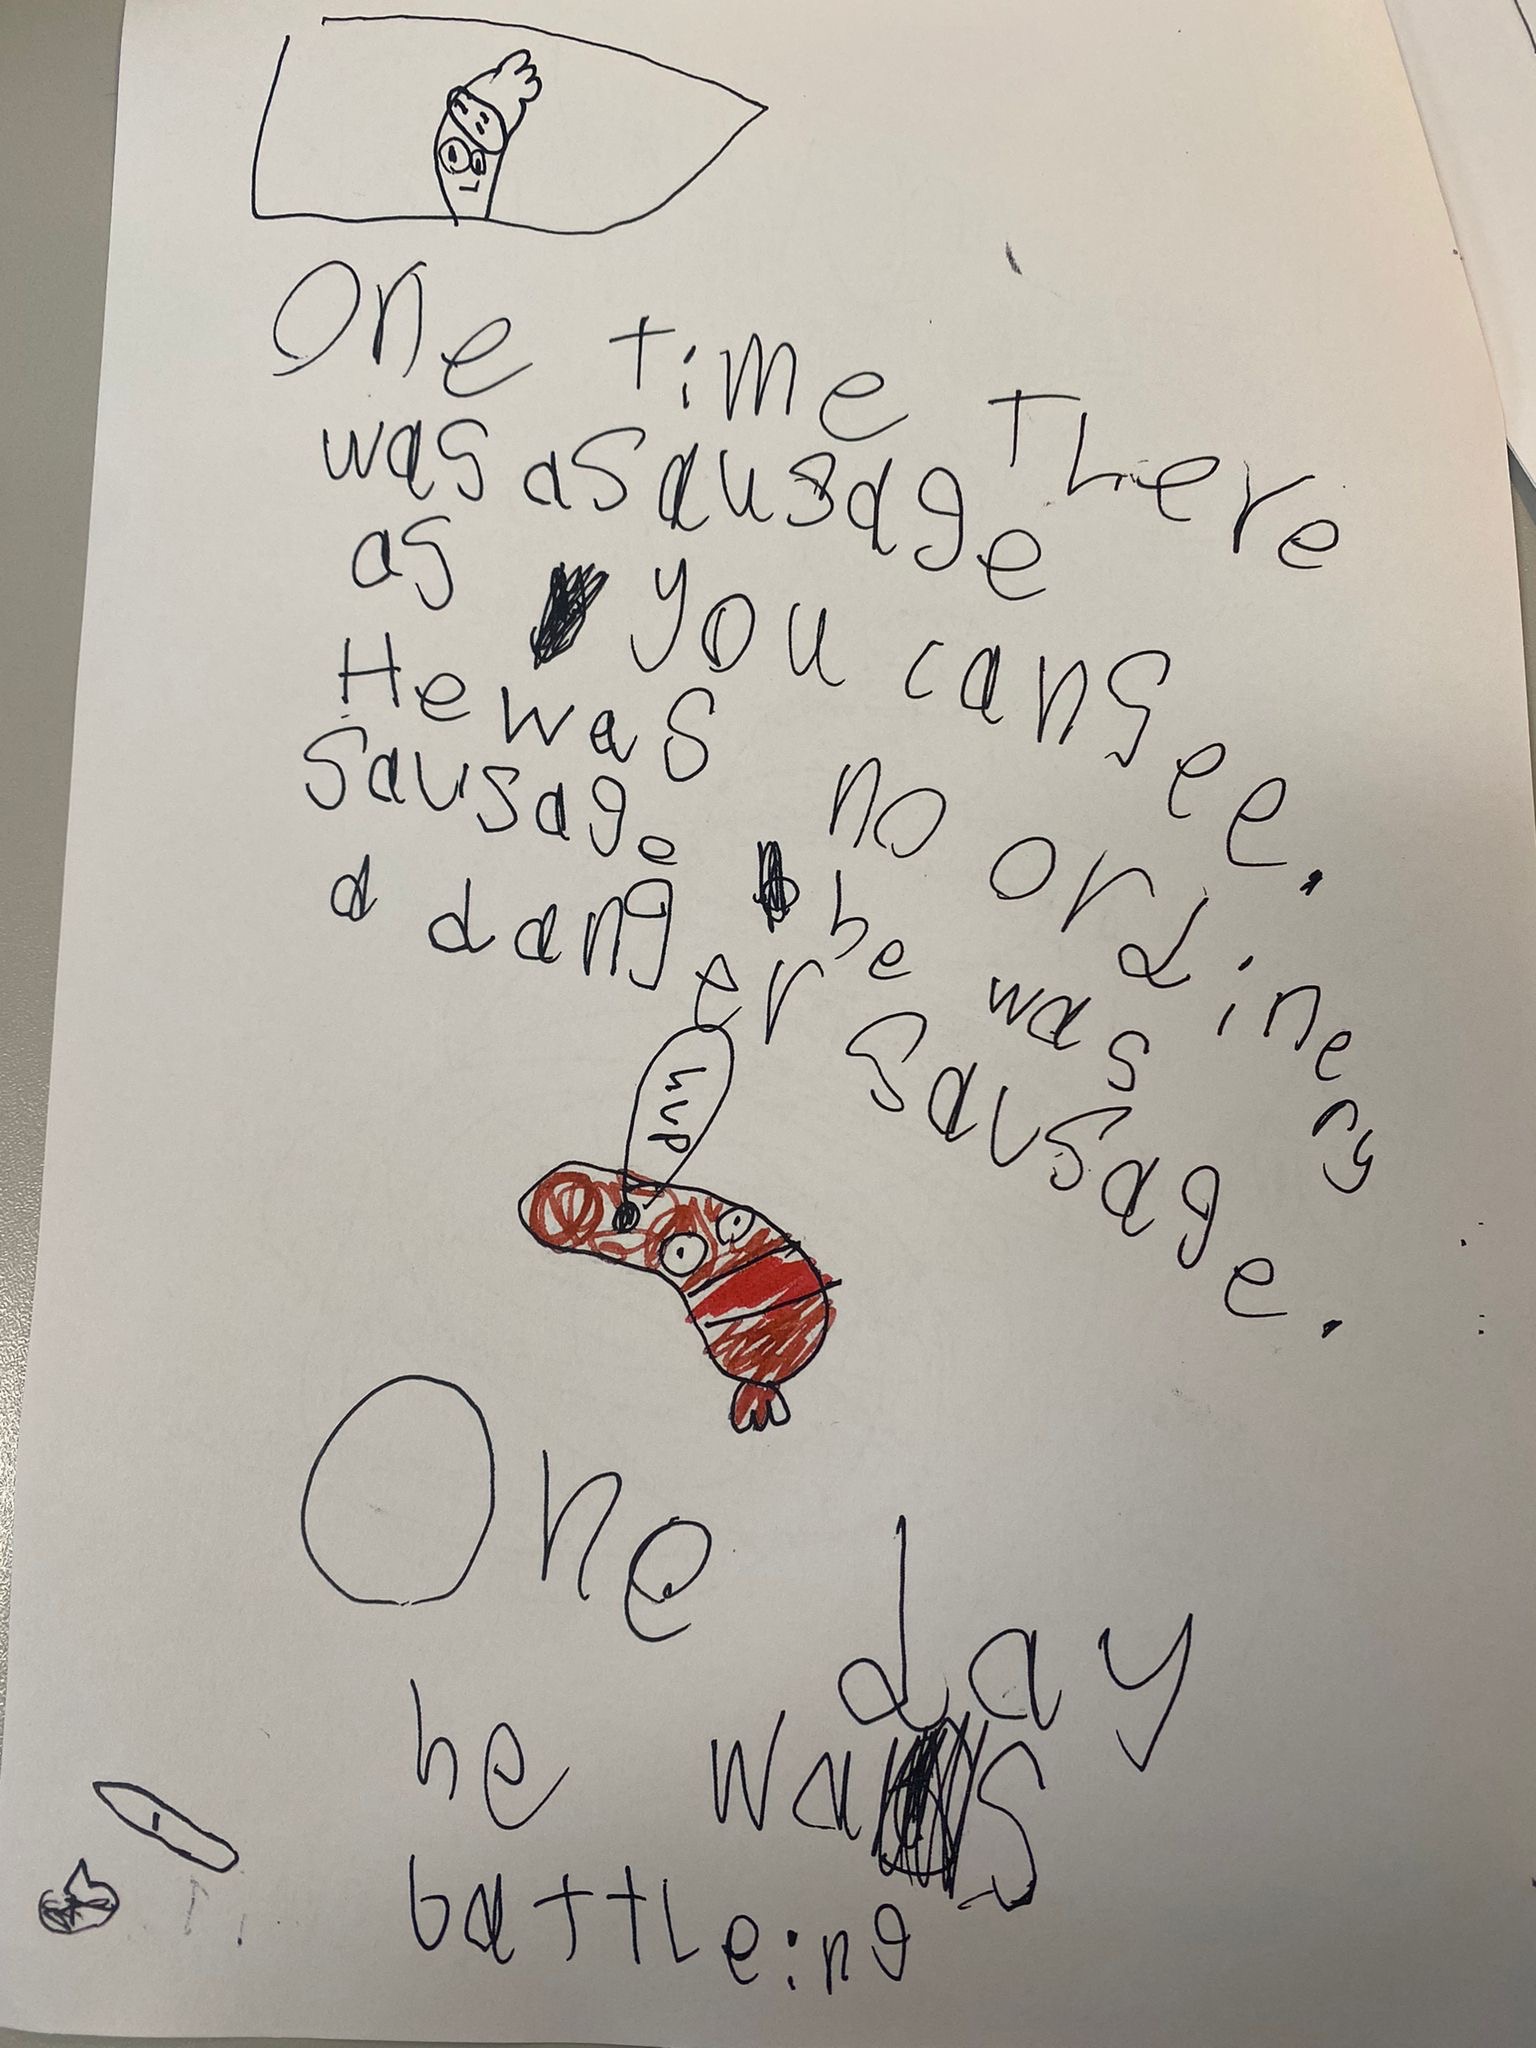 Opening page of a comic book created by a six-year-old